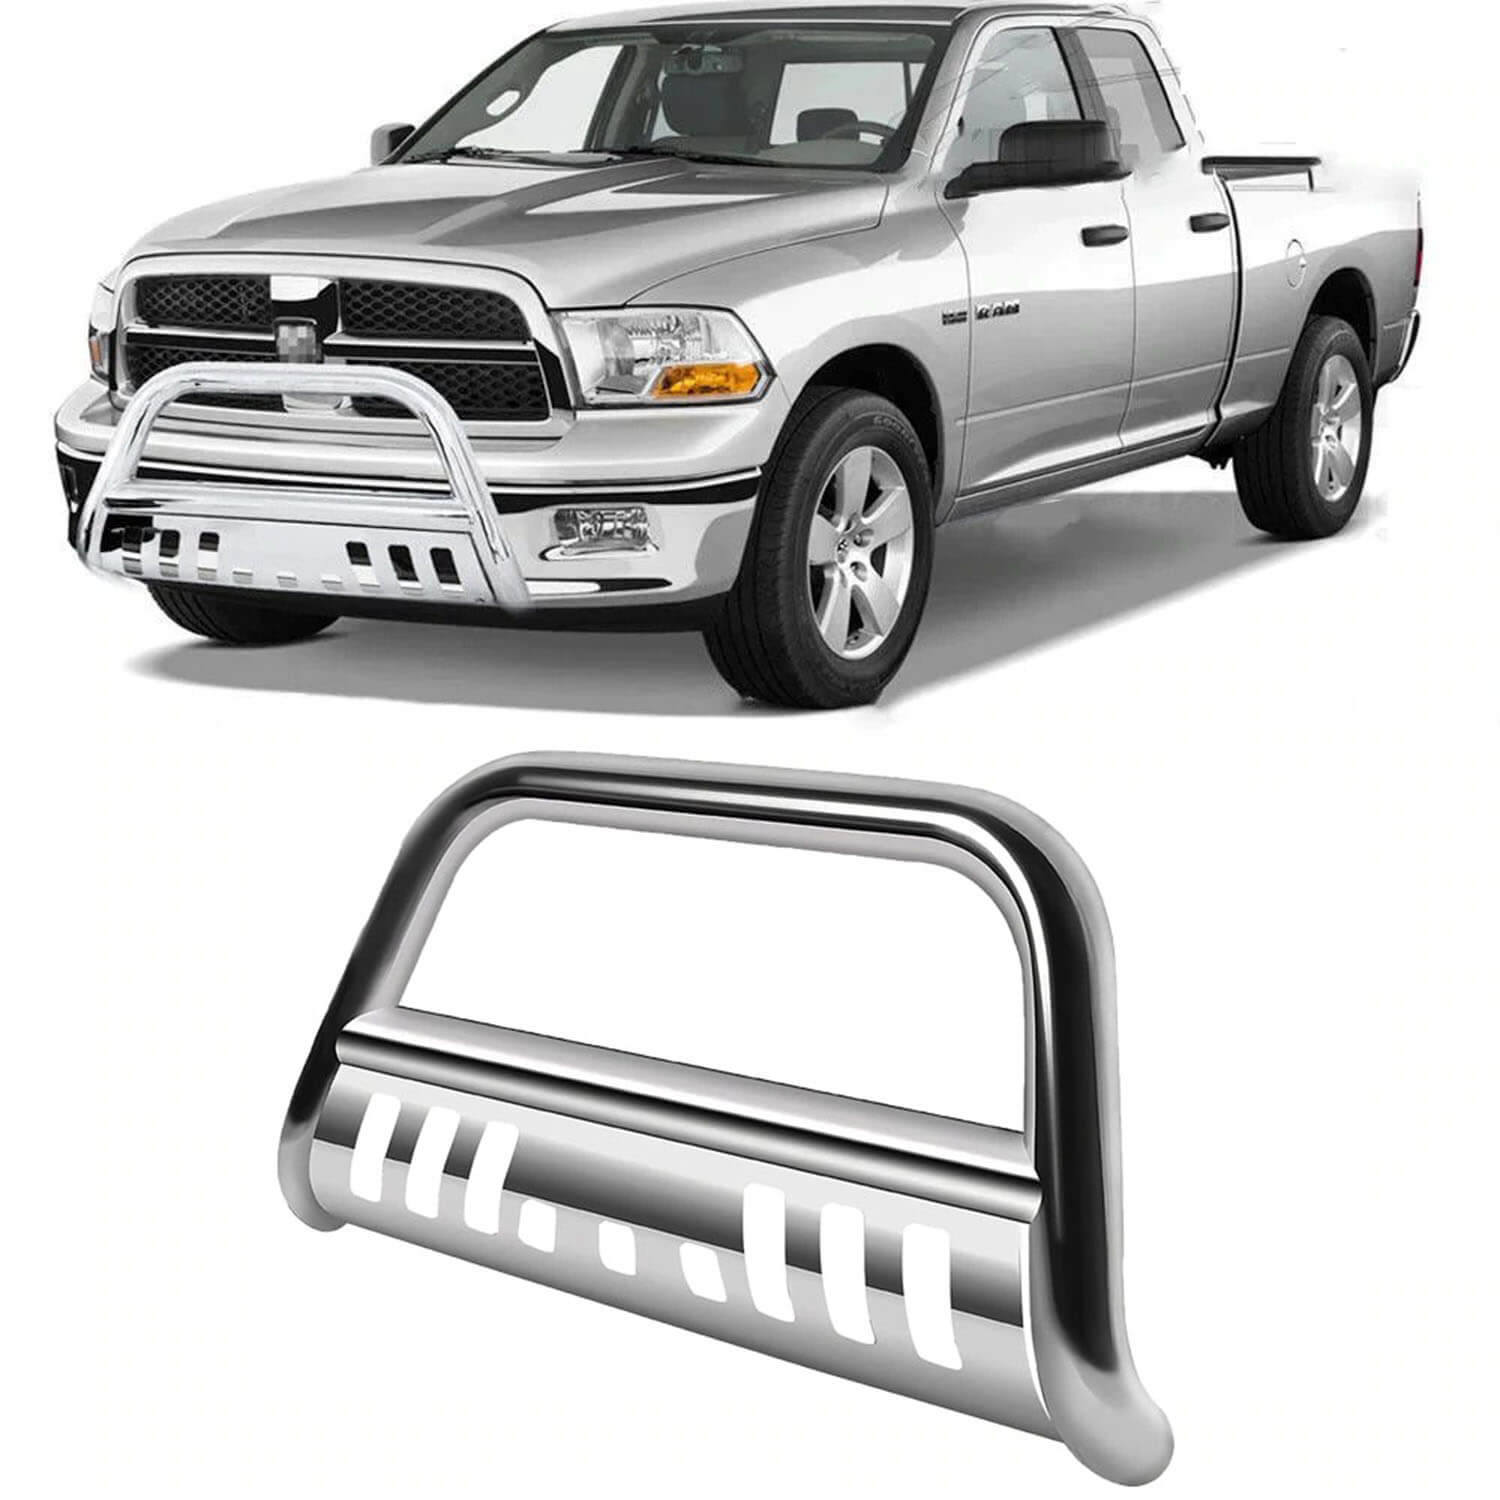 Topline Autopart Matte Black Bull Bar Brush Push Front Bumper Grill Grille Guard With Skid Plate For 09-18 Dodge Ram 1500/19-20 Classic 